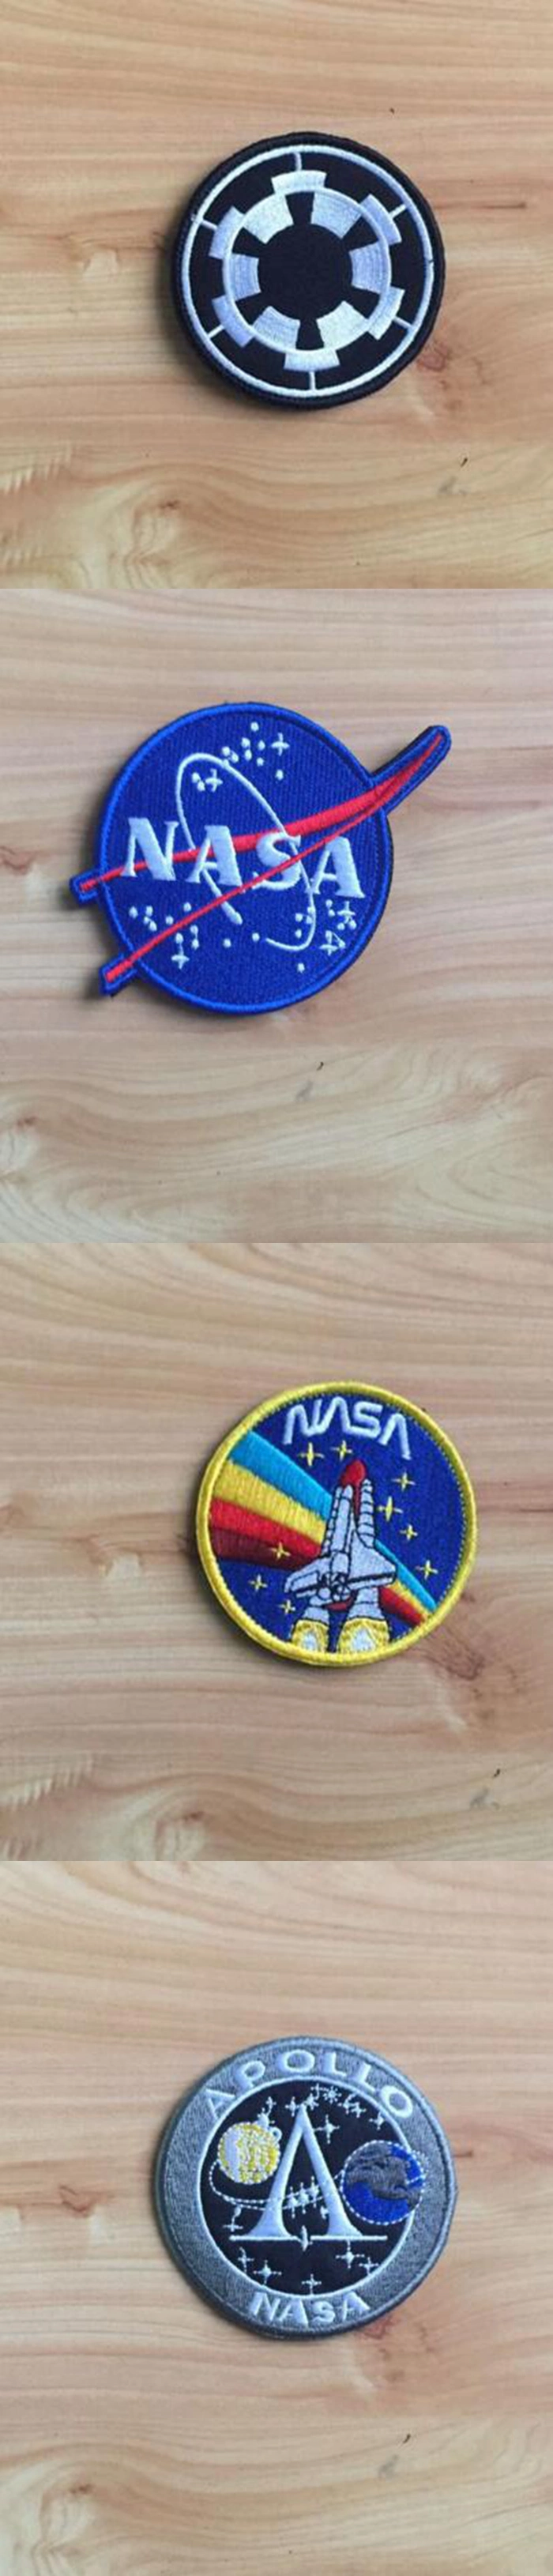 Nasa Decorative Embroidery Patches for Clothing, Hats and Backpacks